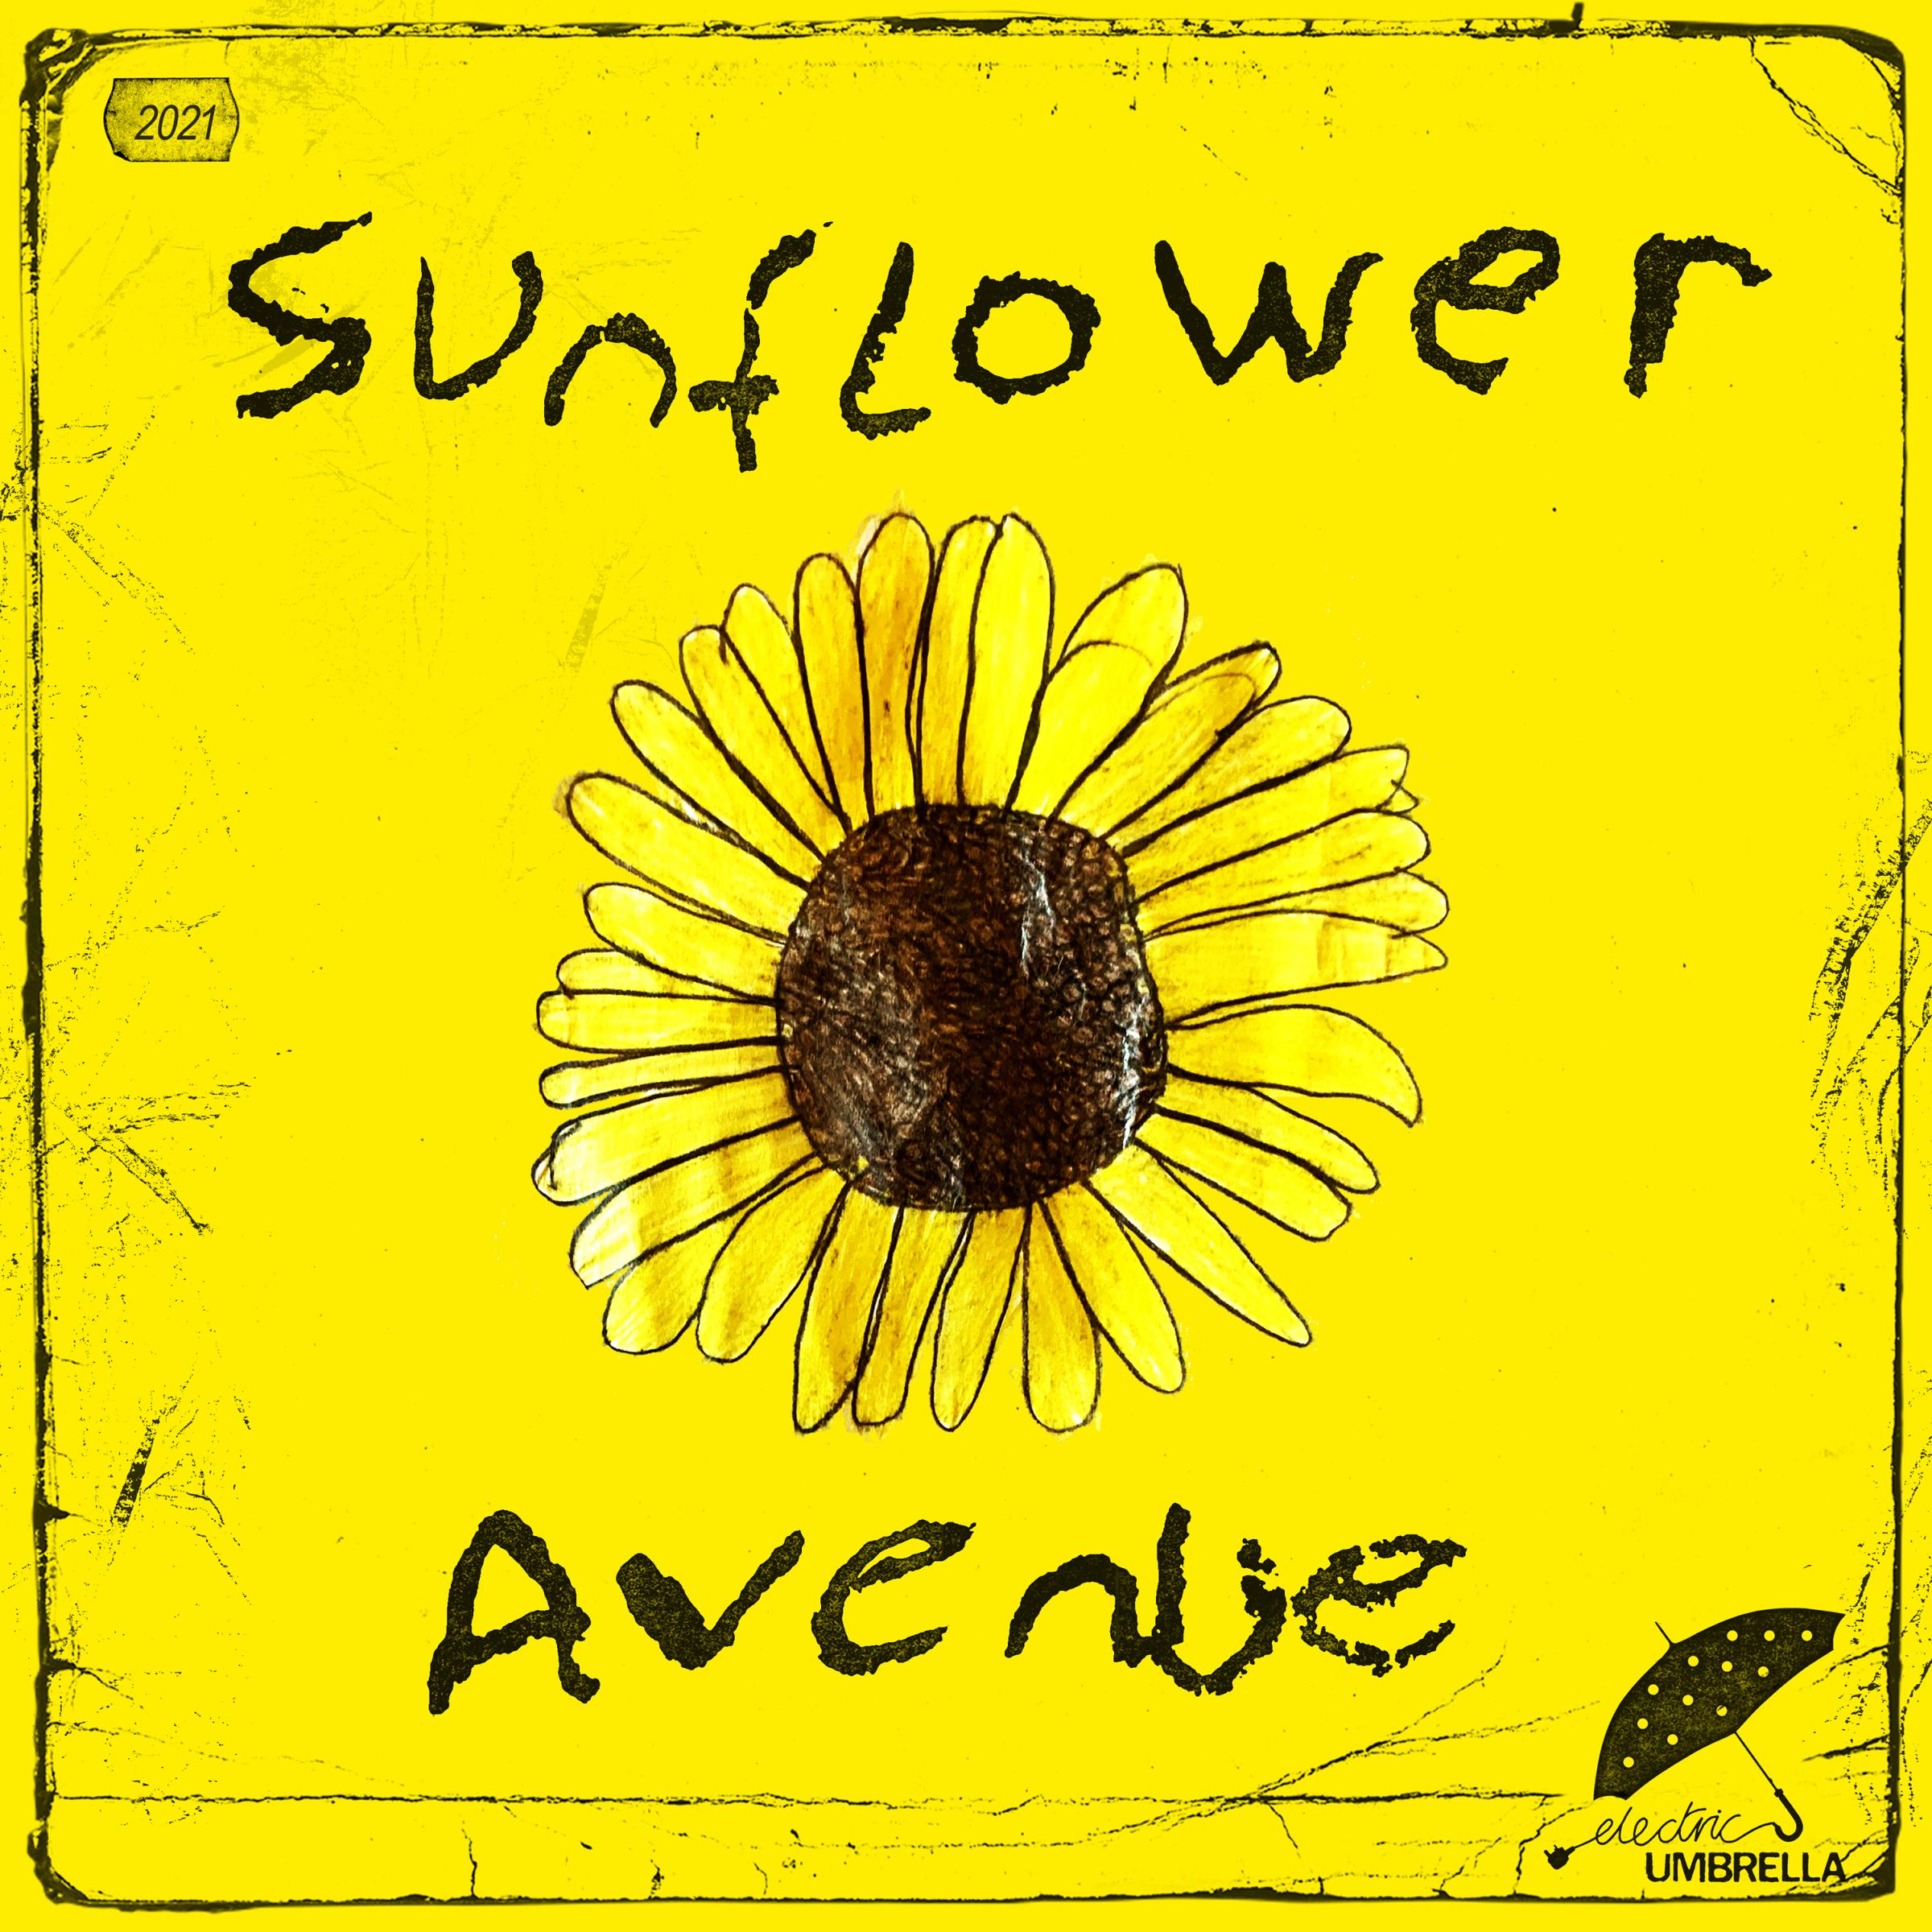 Sunflower Avenue is on sale now